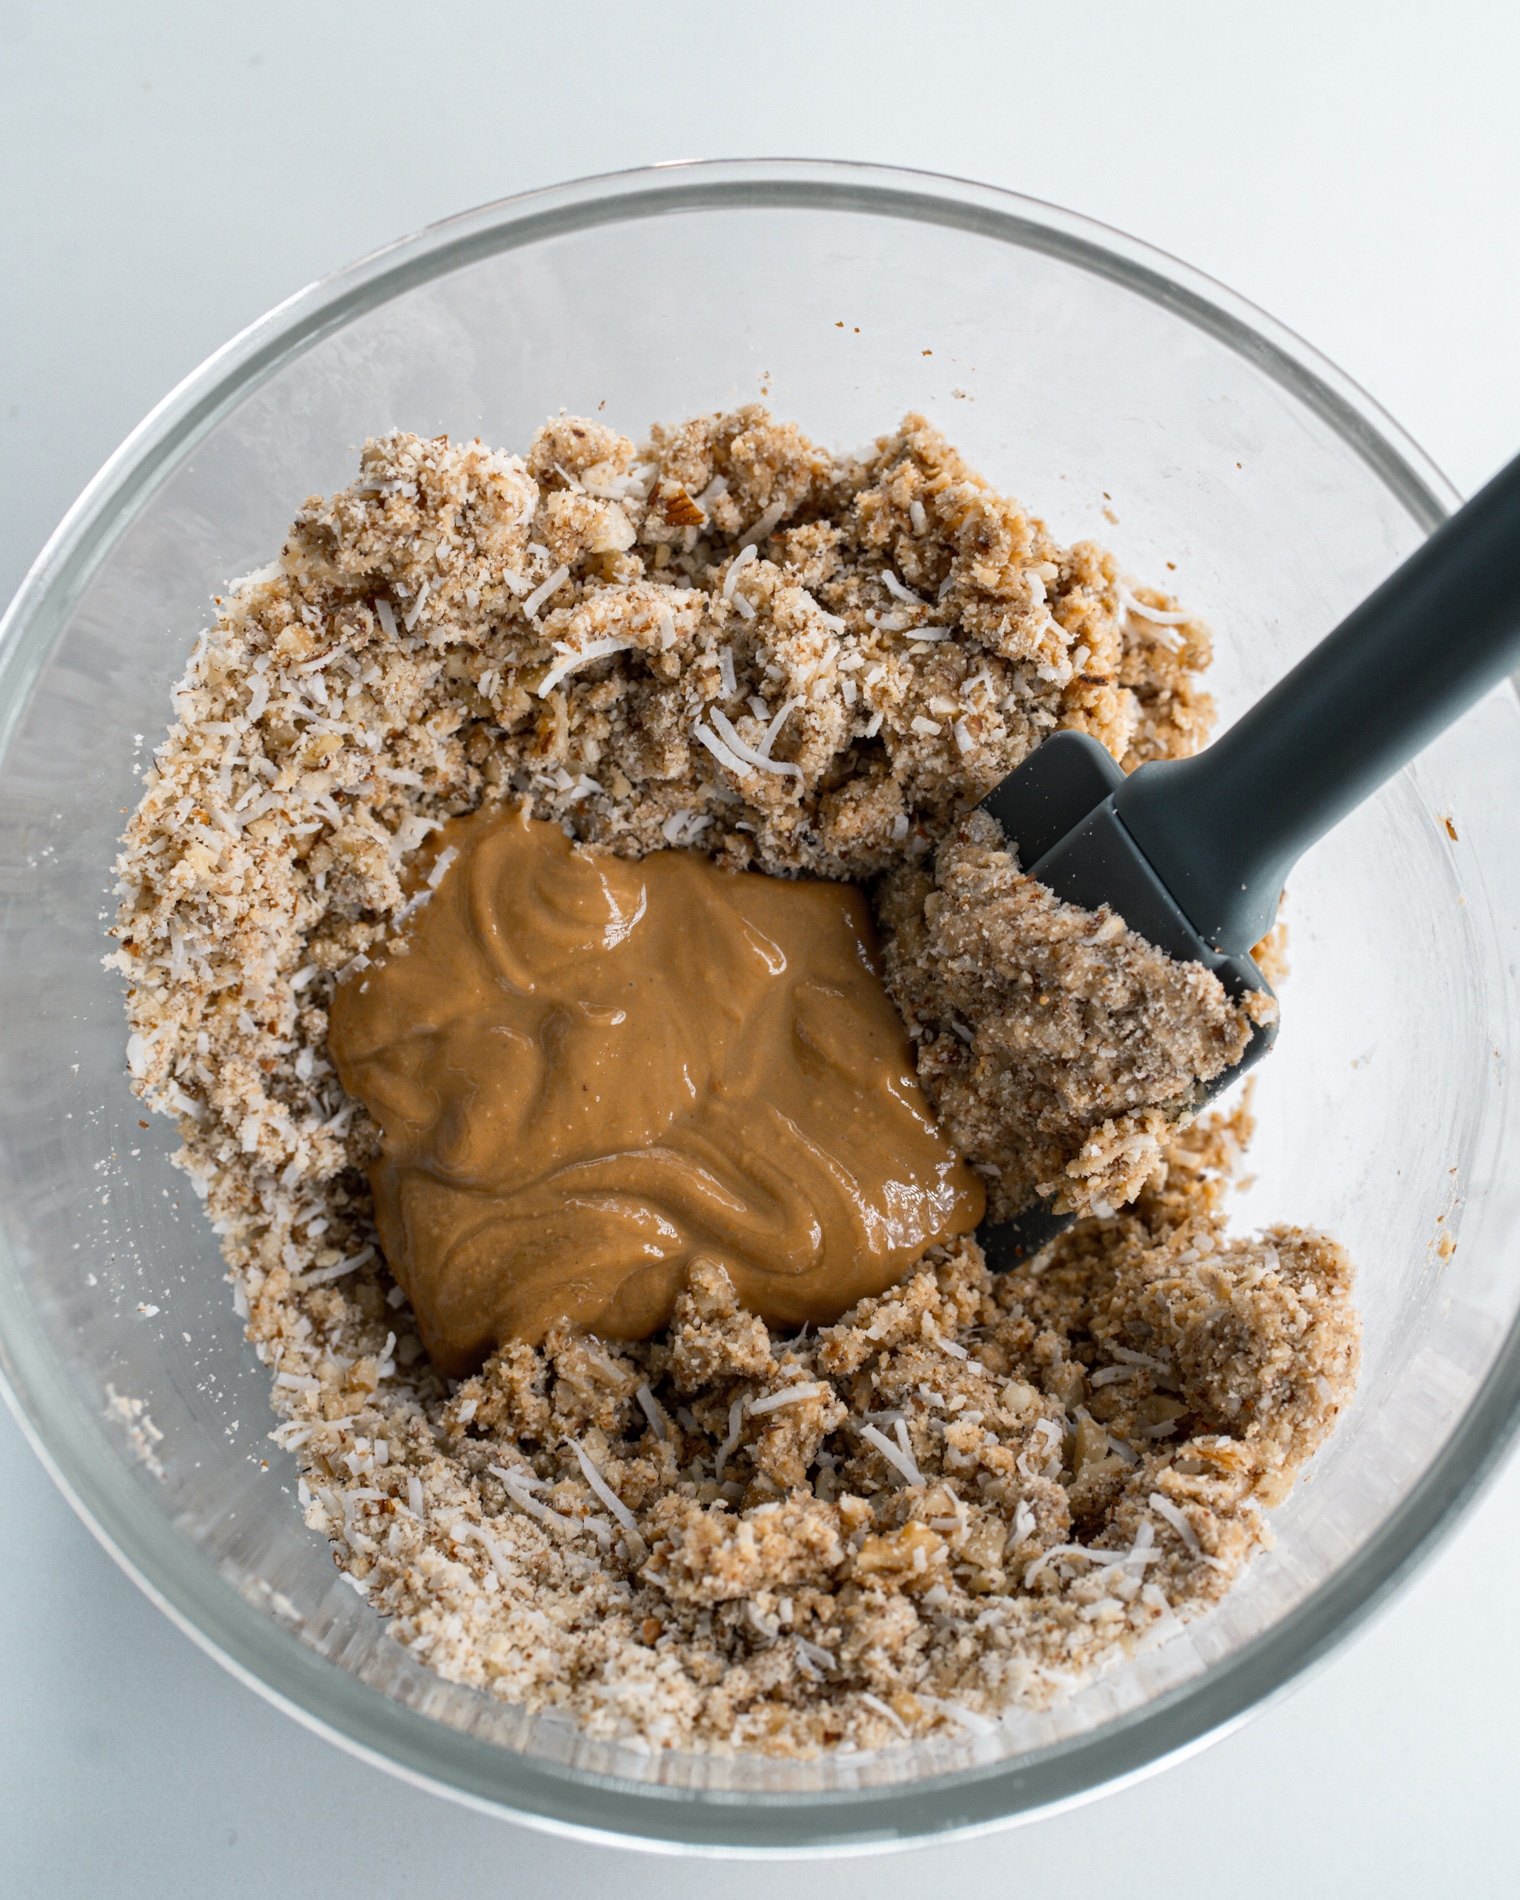 Dry ingredients with almond butter in a glass bowl with grey spatula.